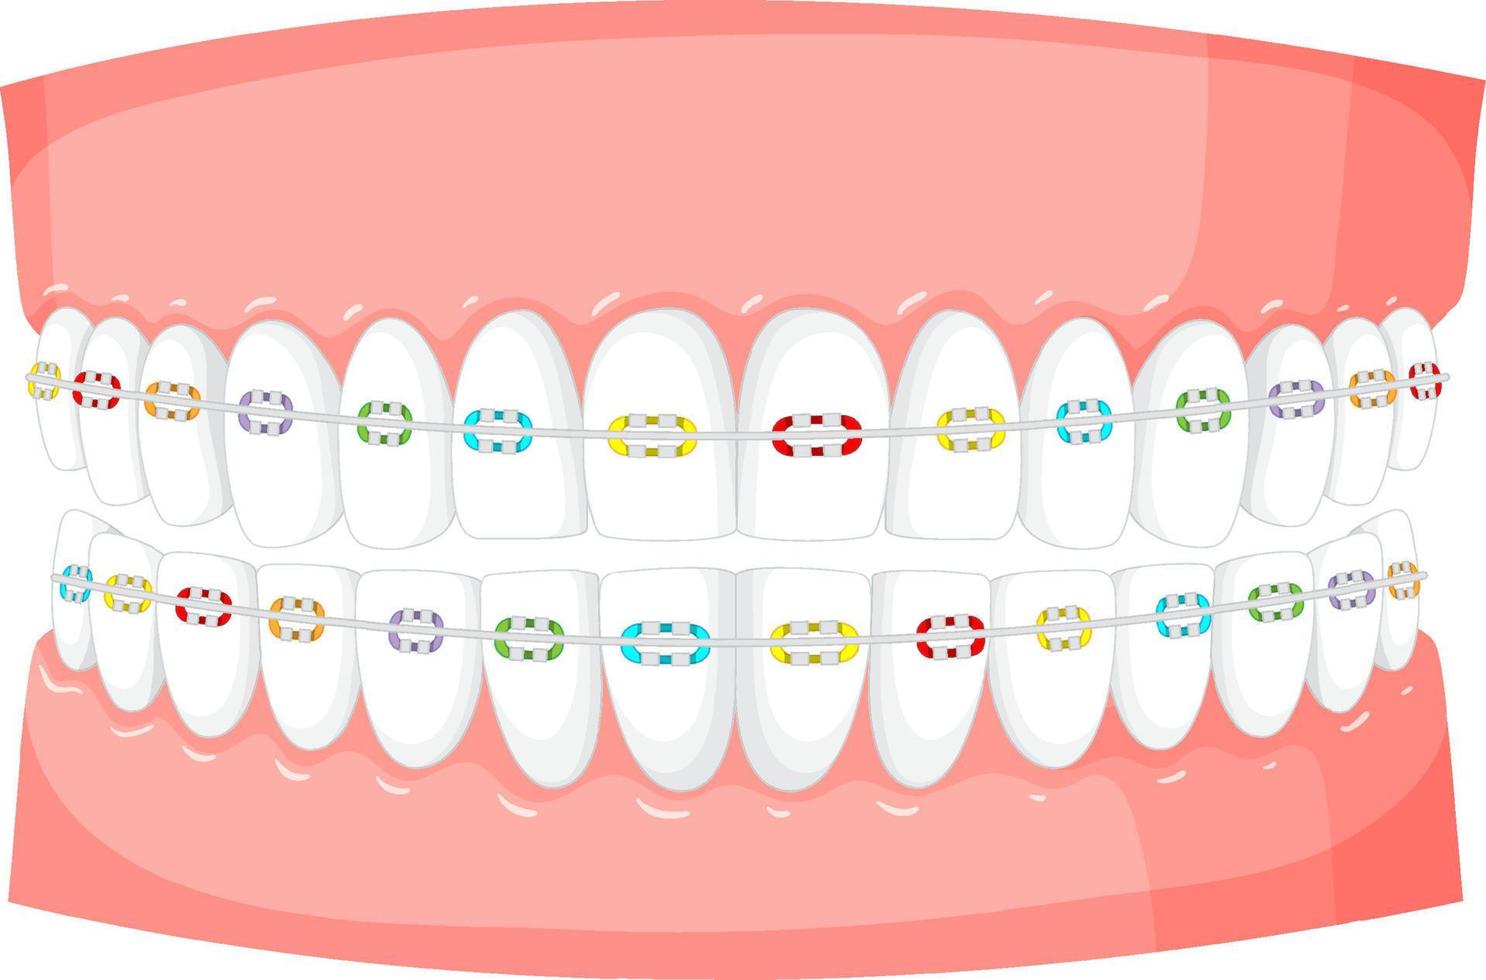 Braces on a model of human teeth on white background vector